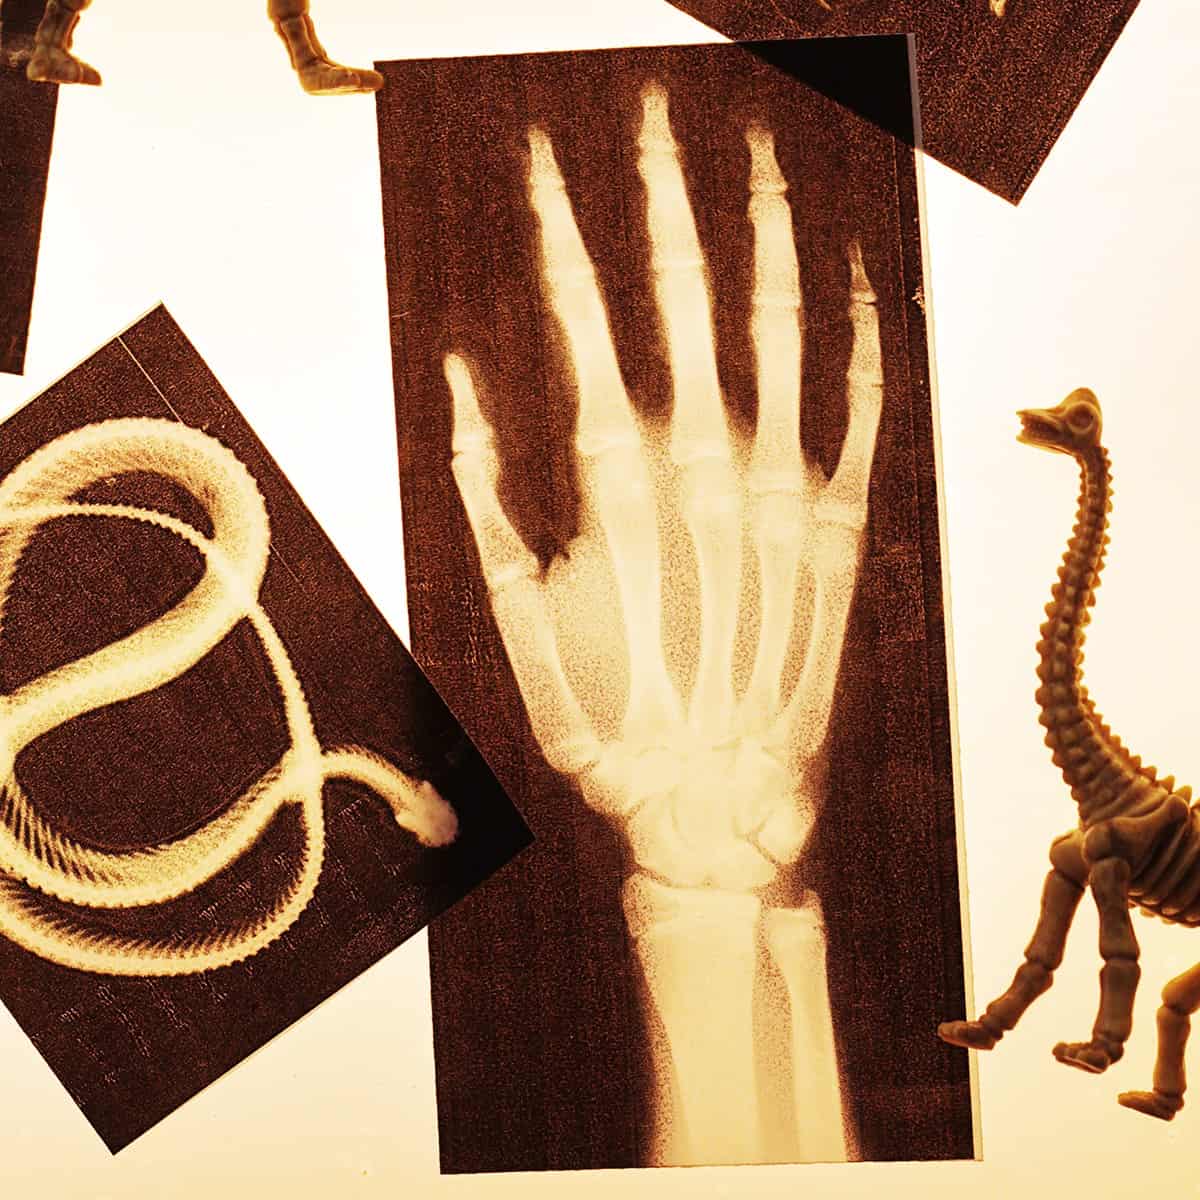 Children’s Play X-Rays that can be printed at home!